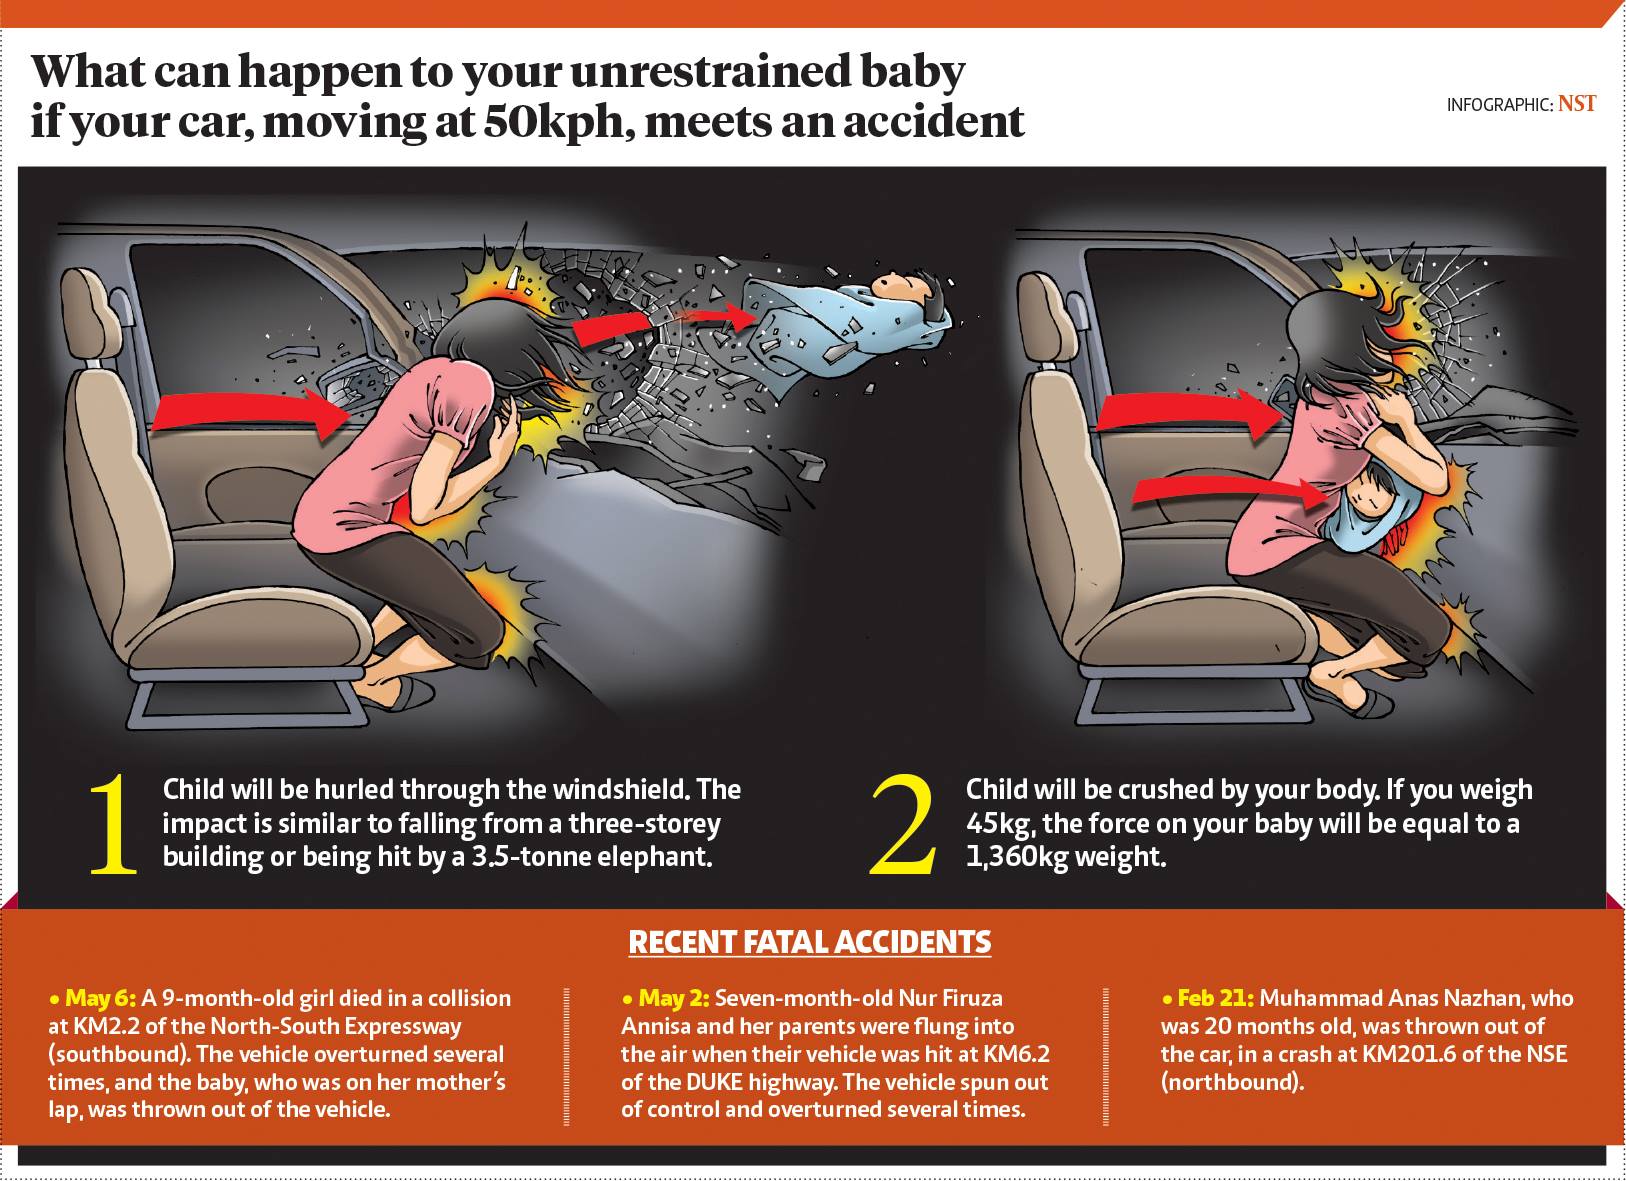 Safety tips for baby seats in cars